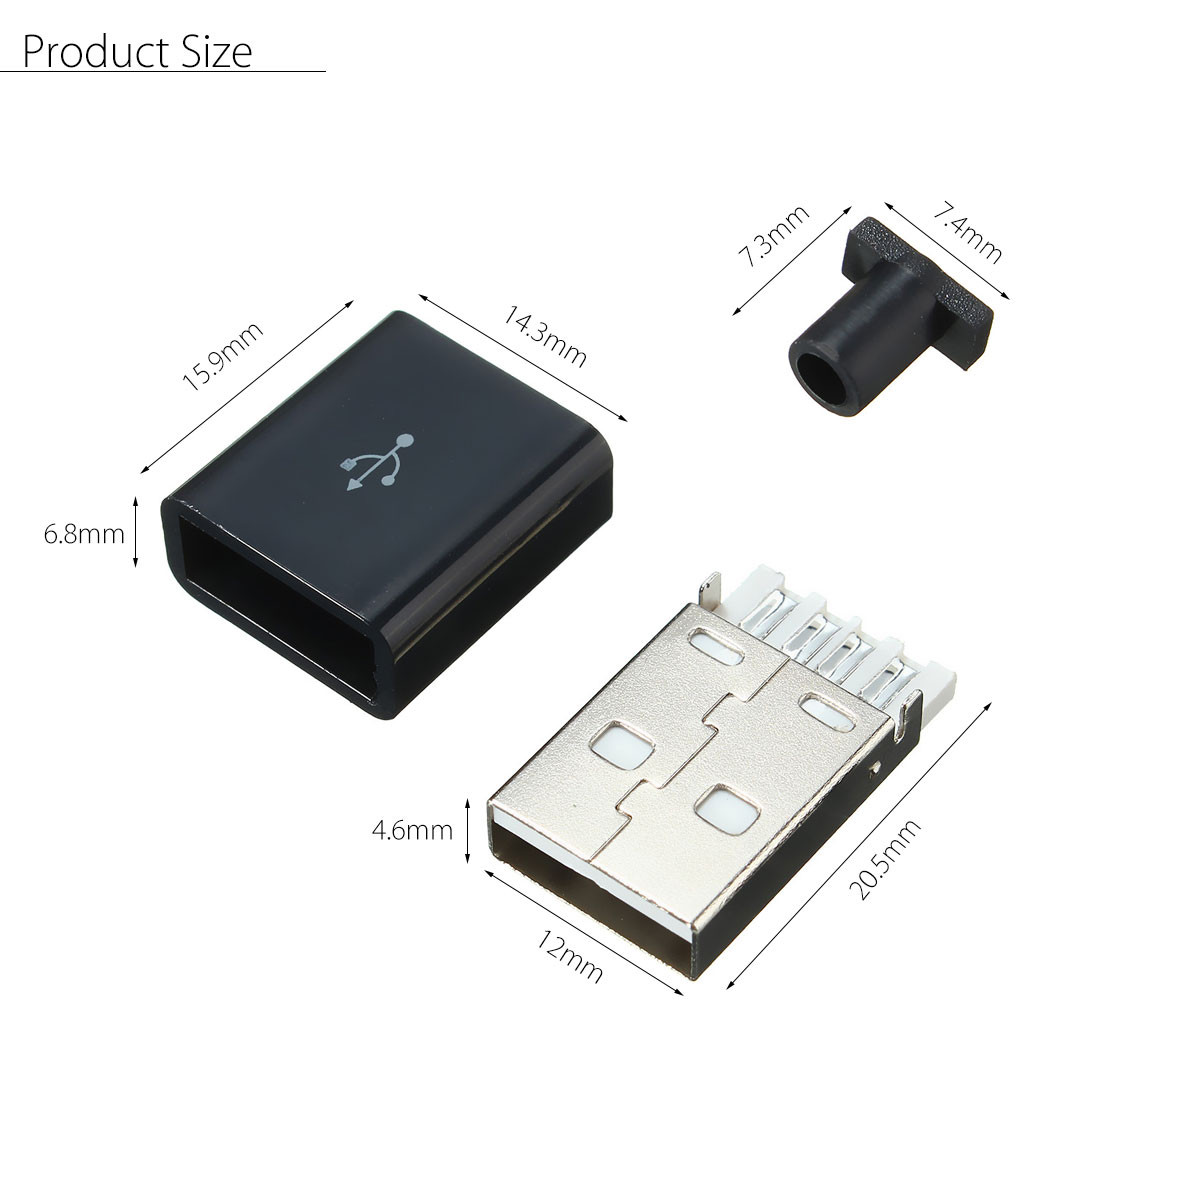 1Pcs-USB-20-Type-A-Plug-4-pin-Male-Adapter-Solder-Connector--Black-Cover-Square-1287374-3